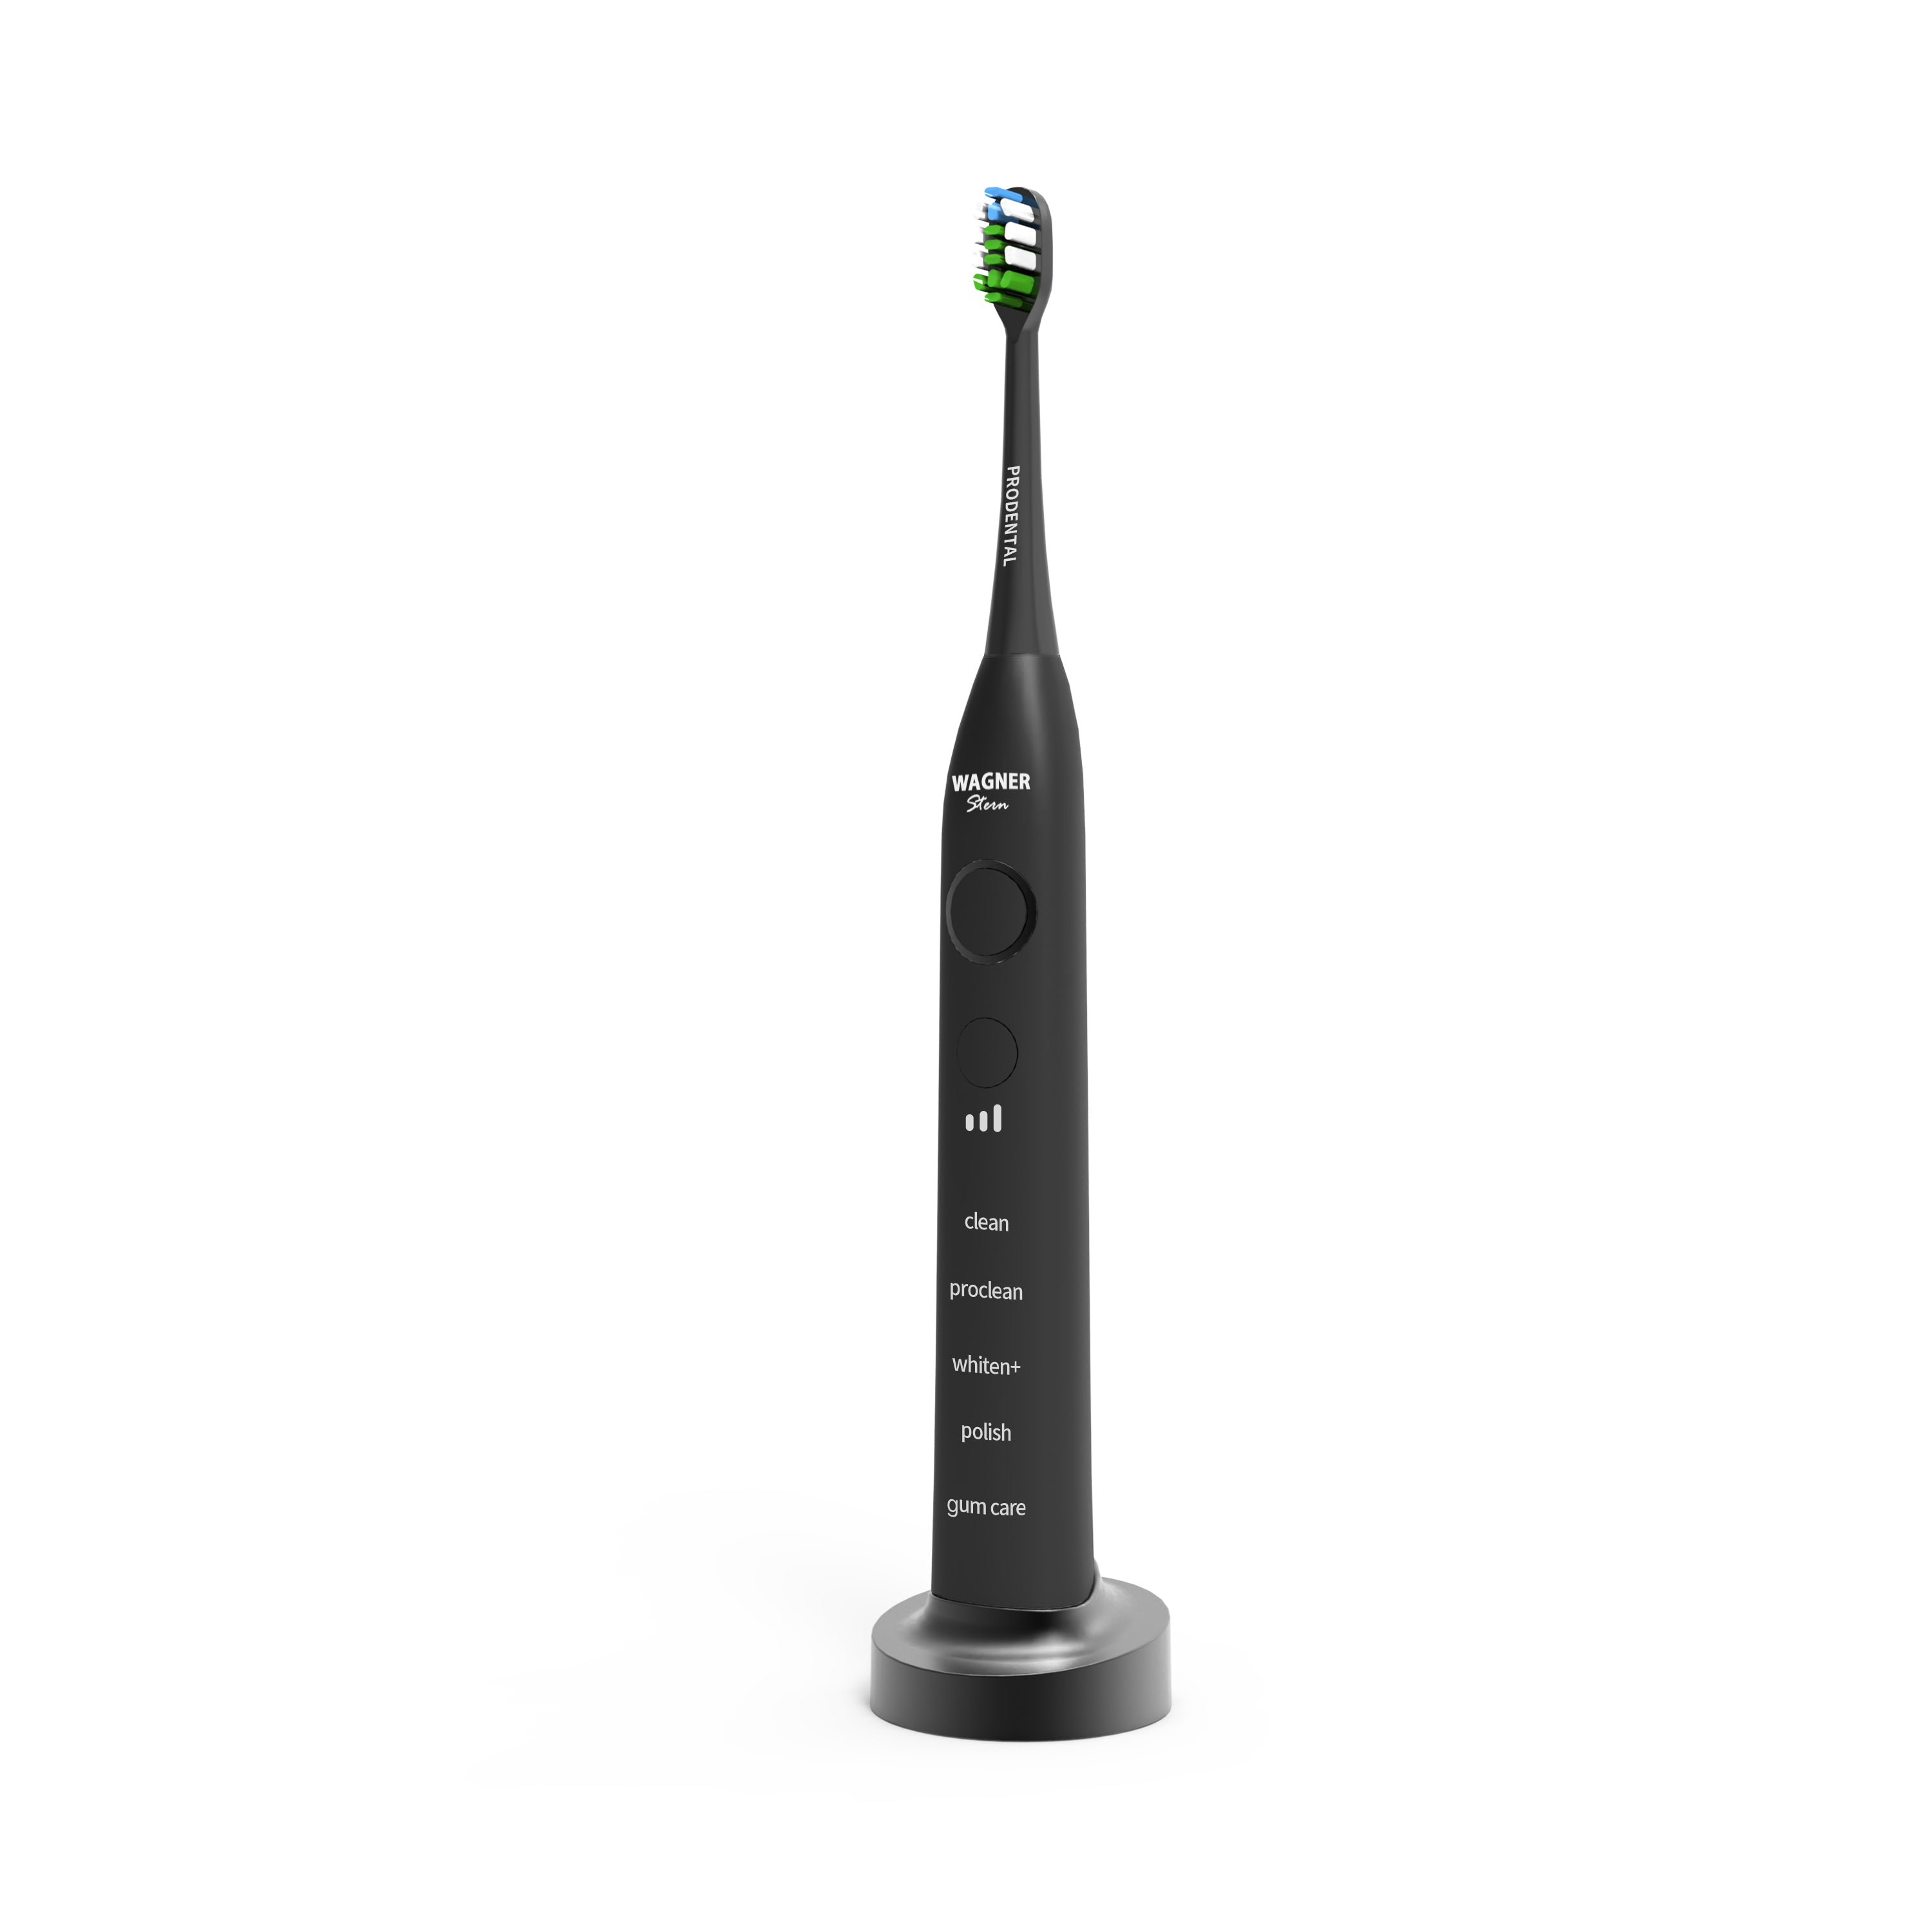 Wagner & Stern ProDental Series Set of 2 Electric Toothbrushes 5 Brushing Modes and 3 Intensity Levels, 8 Dupont Bristles, 2 Premium Travel Case.